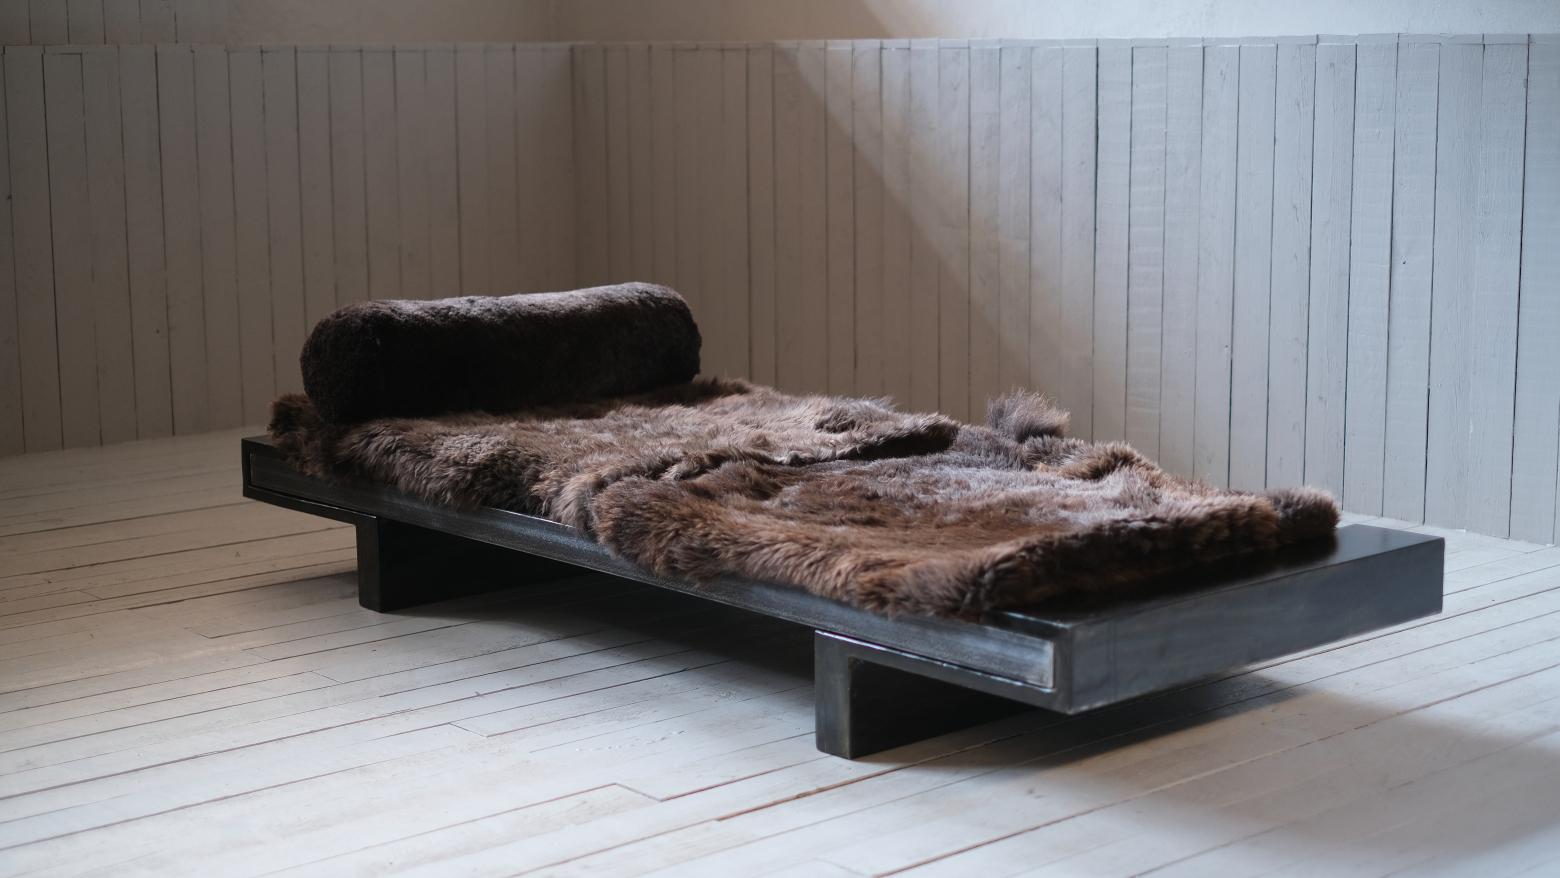 Daybed, Arno Declercq
Limited edition
Sold exclusively by Galerie Philia
Materials: patinated steel - raw steel - Sheep wool
Dimensions: L 205 x D 80 x H 27 cm

Custom size on request.
Pillow can be in fabric on request.

Arno